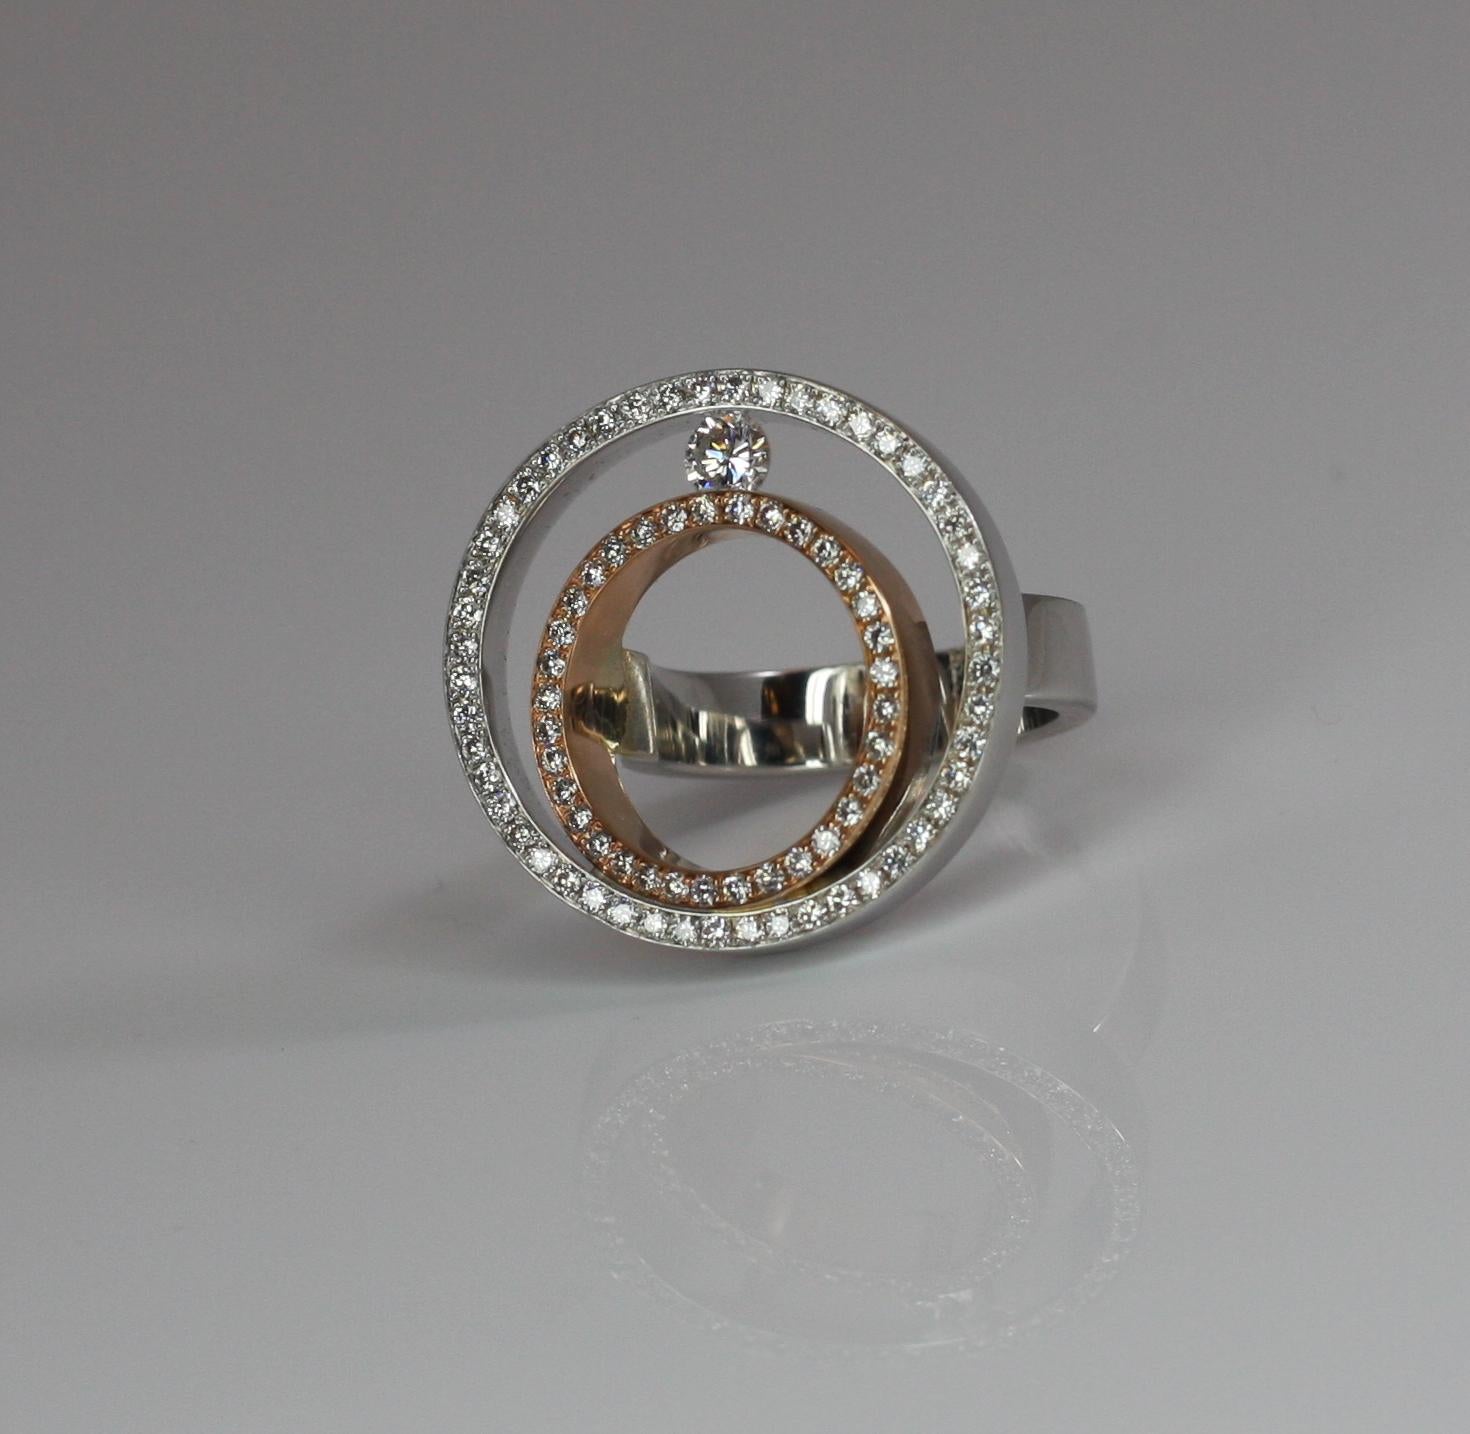 S.Georgios designer White and Rose Gold 18 Karat Ring features two gorgeous round surfaces with diamonds. This beautiful ring is made from three solid gold pieces connected and features two bezels of pure white brilliant-cut diamonds total weight of